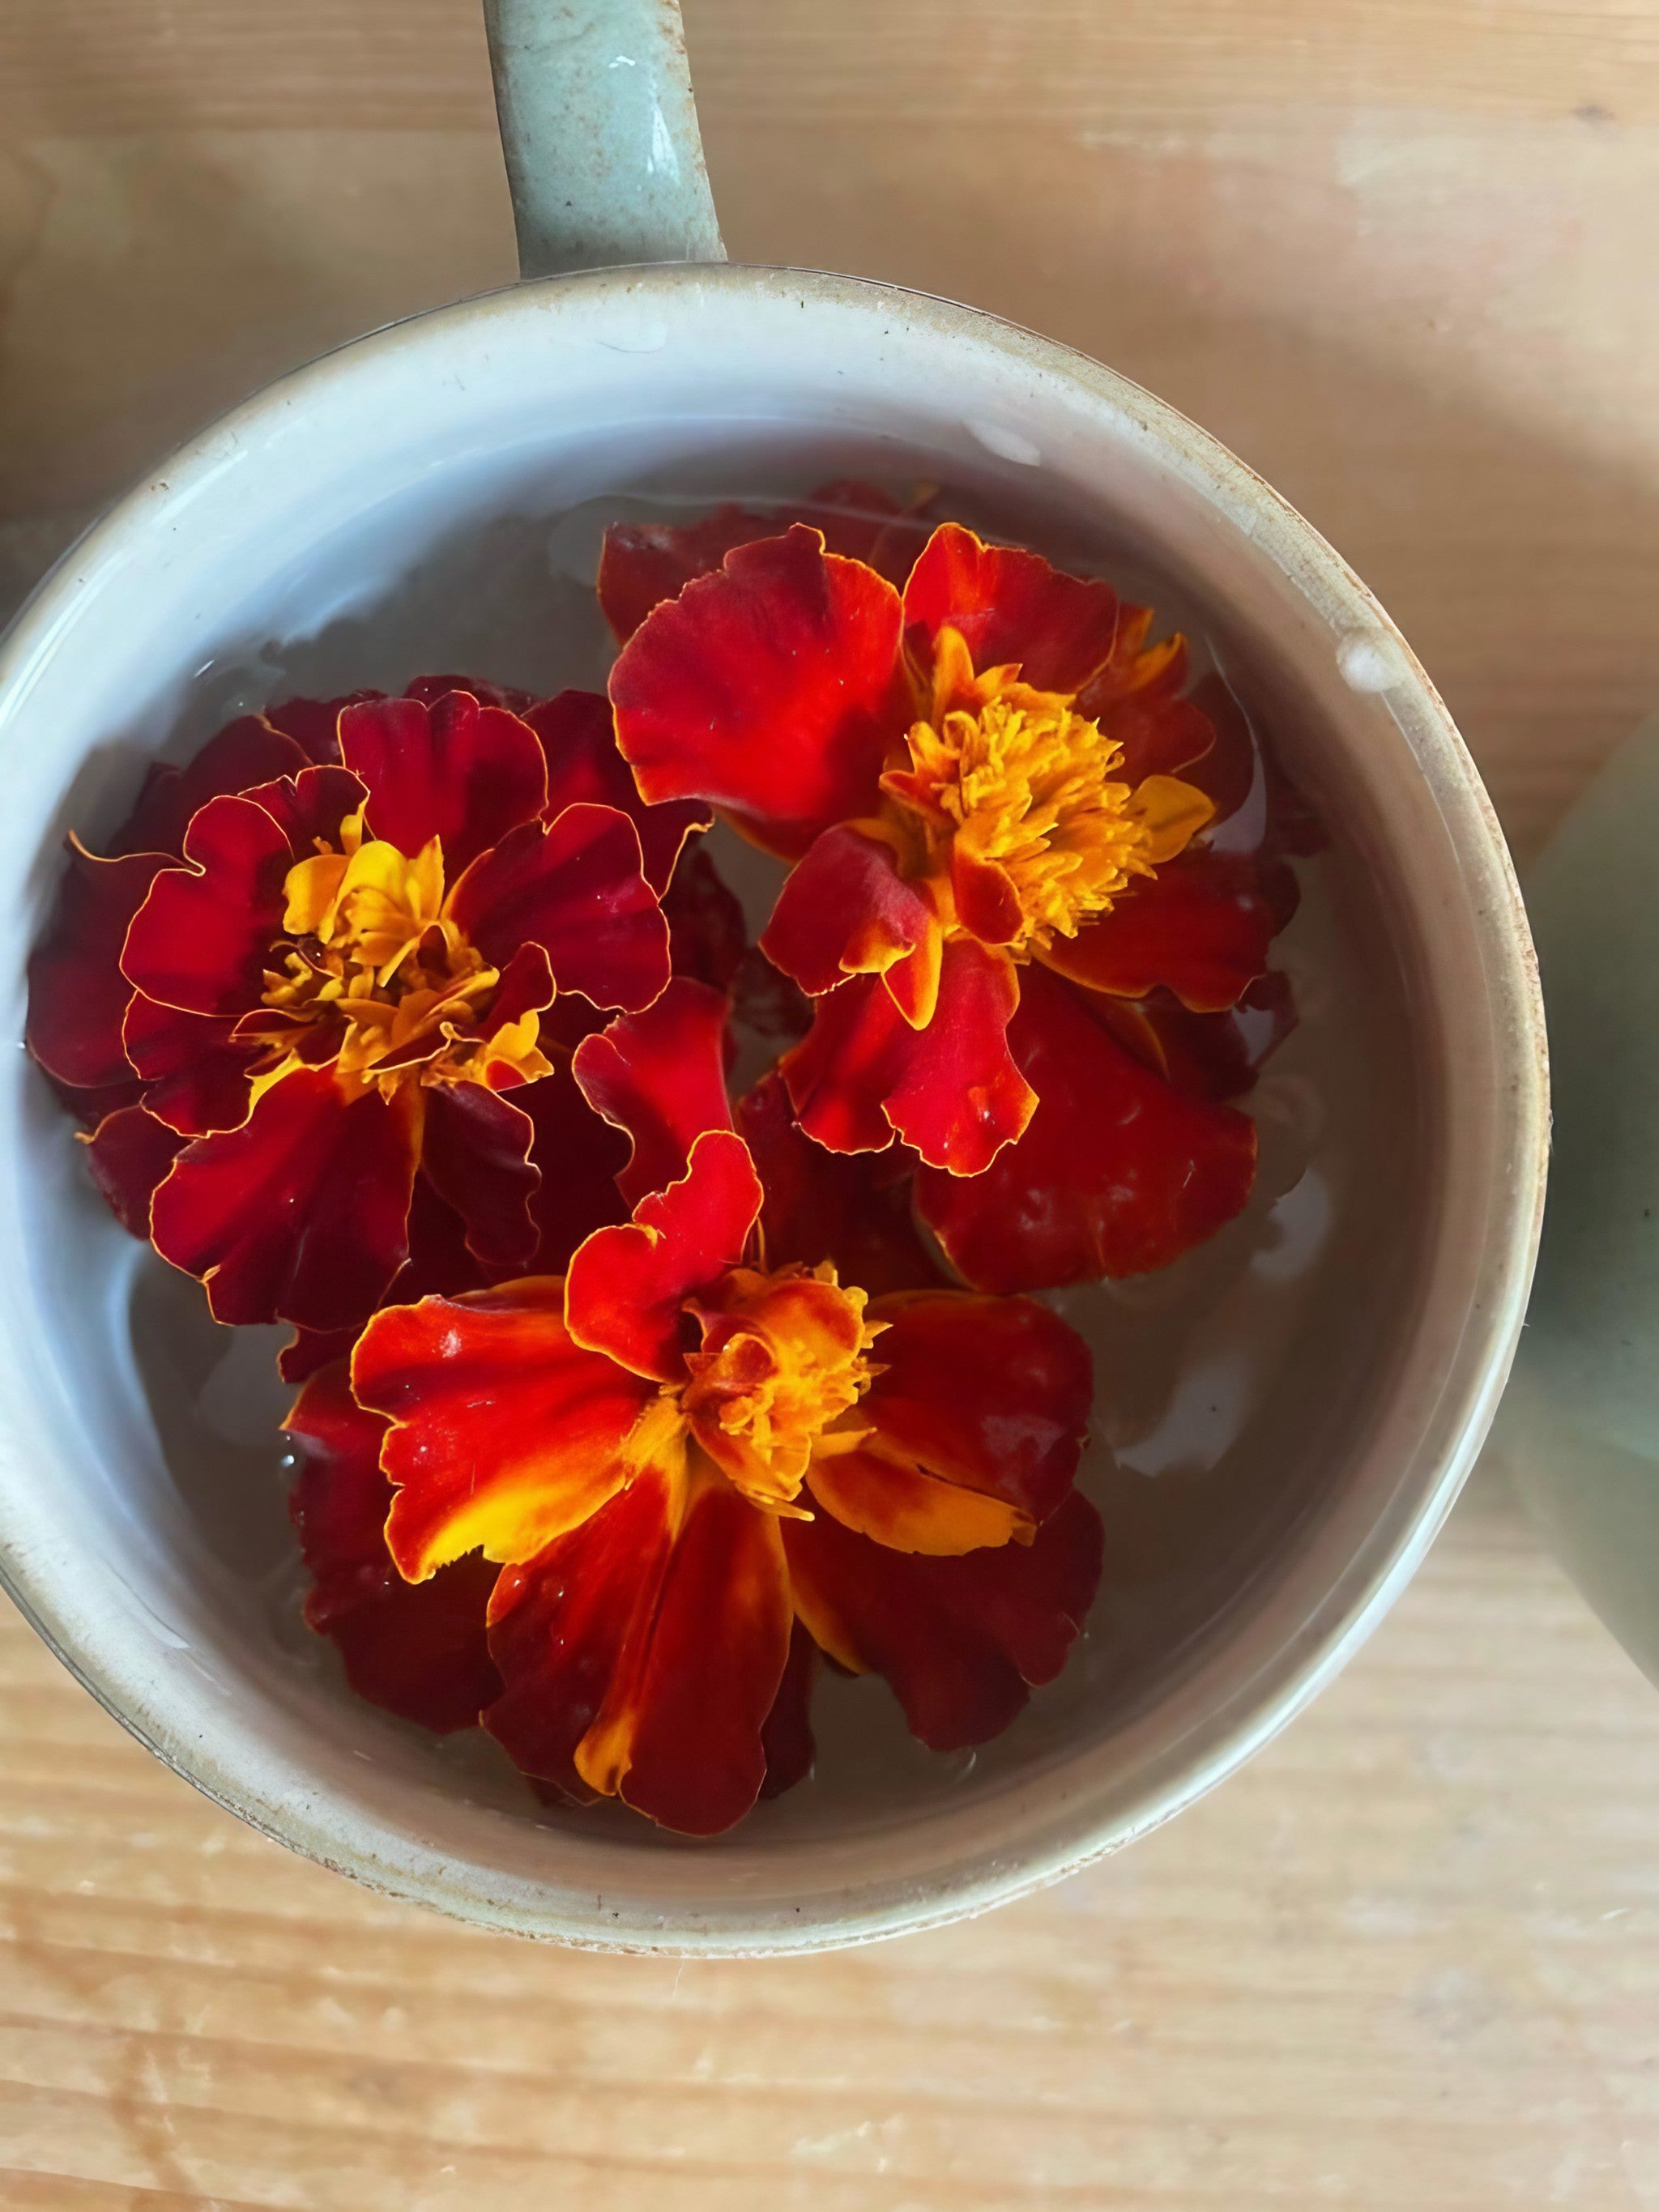 French Marigold Red Cherry flowers floating in a clear water bowl